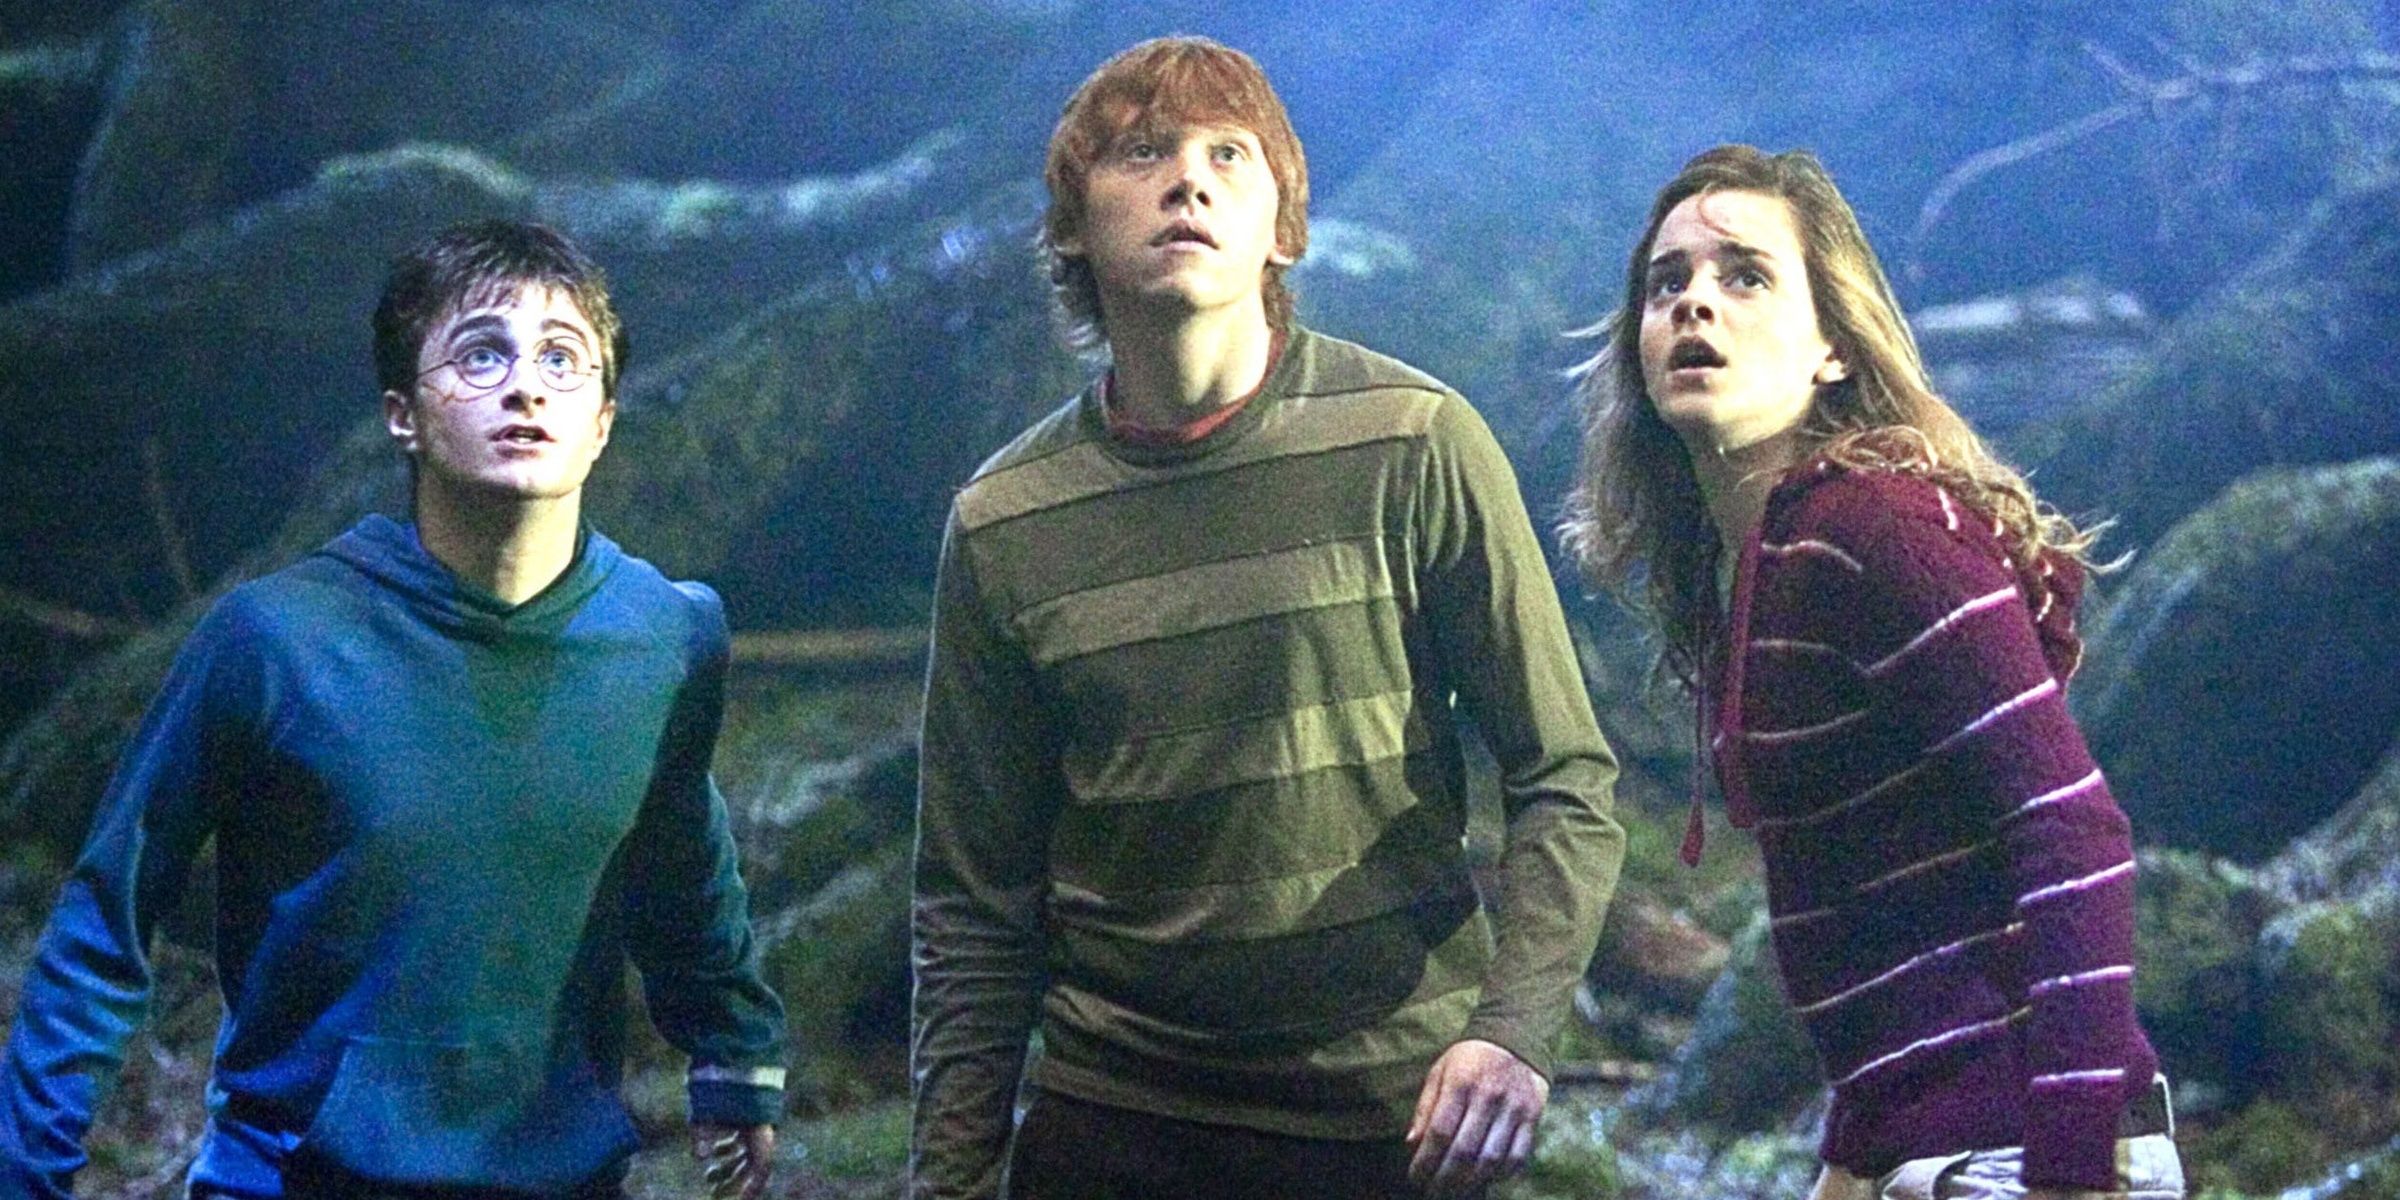 Harry, Ron, and Hermione in The Forbidden Forrest